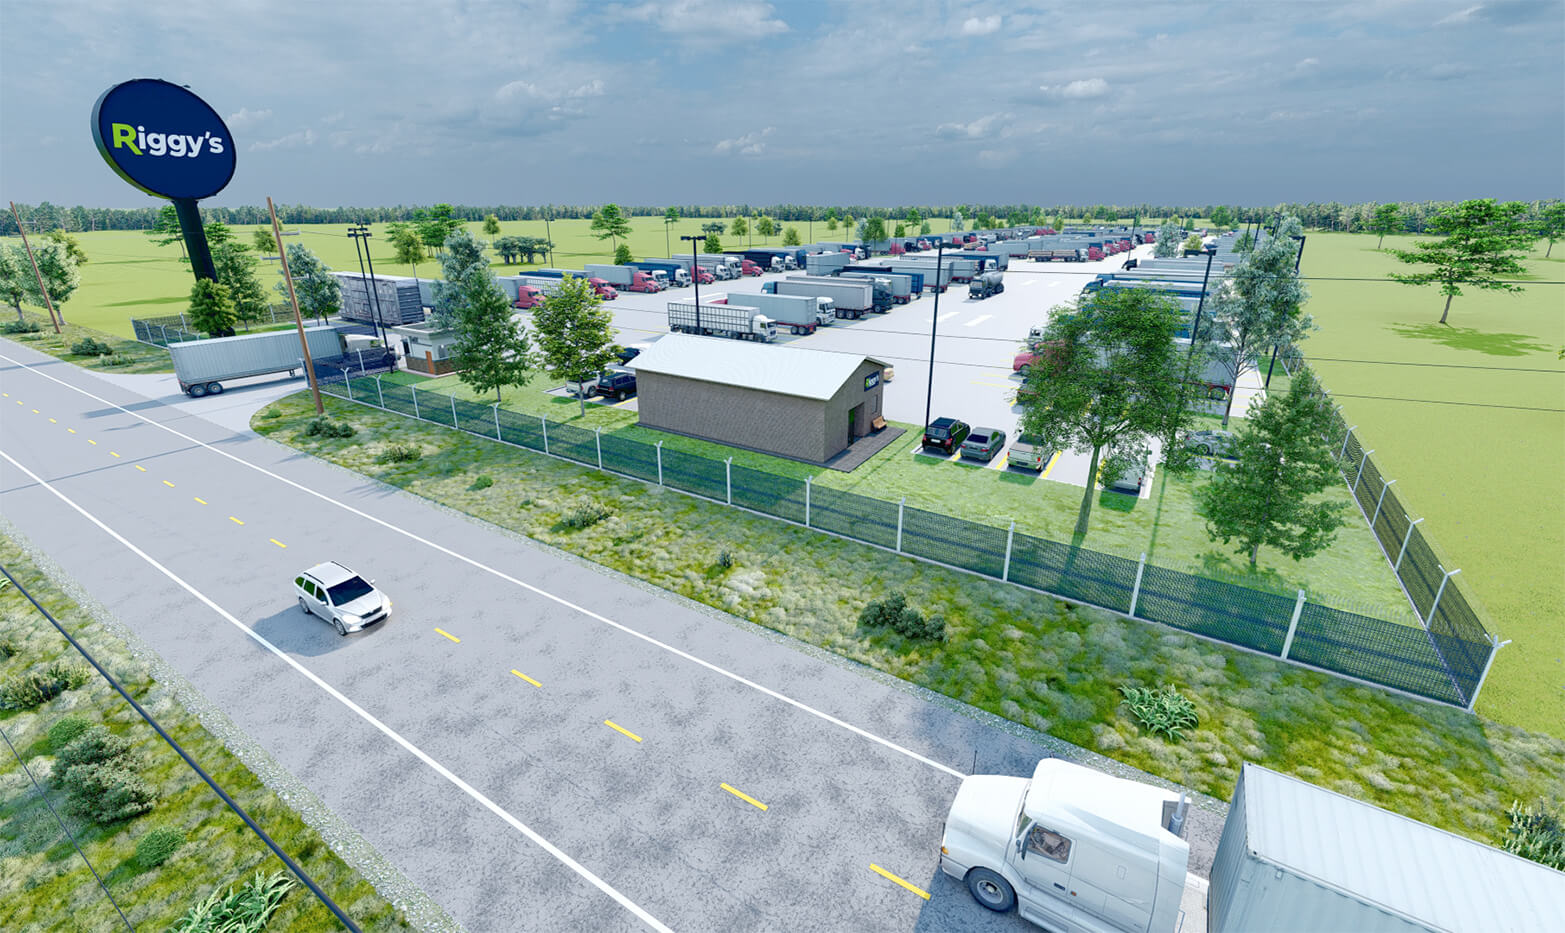 Riggy's Flagship Parking Lot Rendering